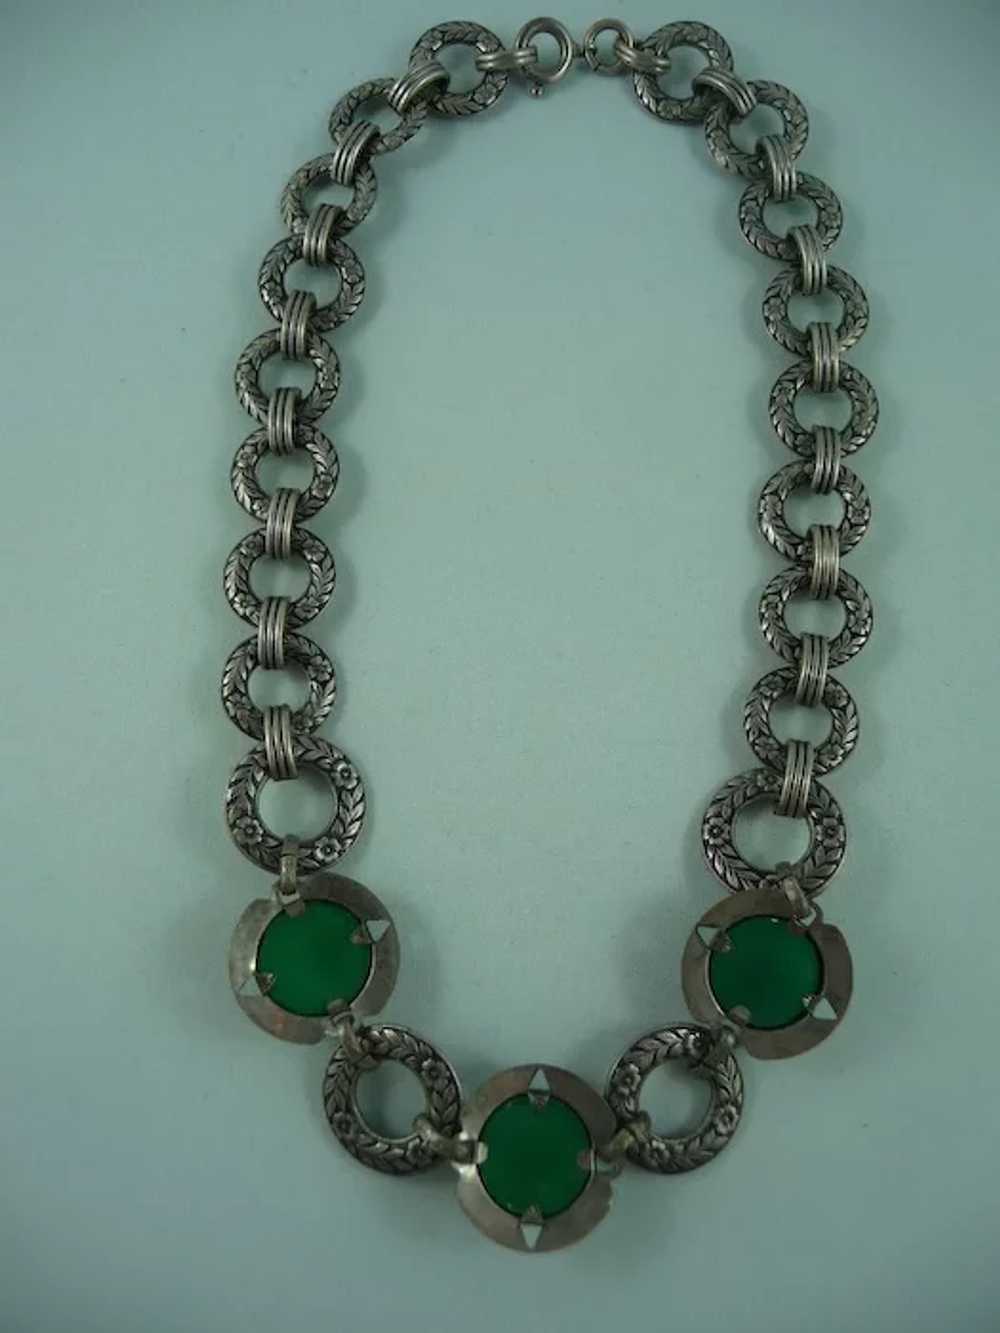 Lovely Deco Green Necklace - image 3